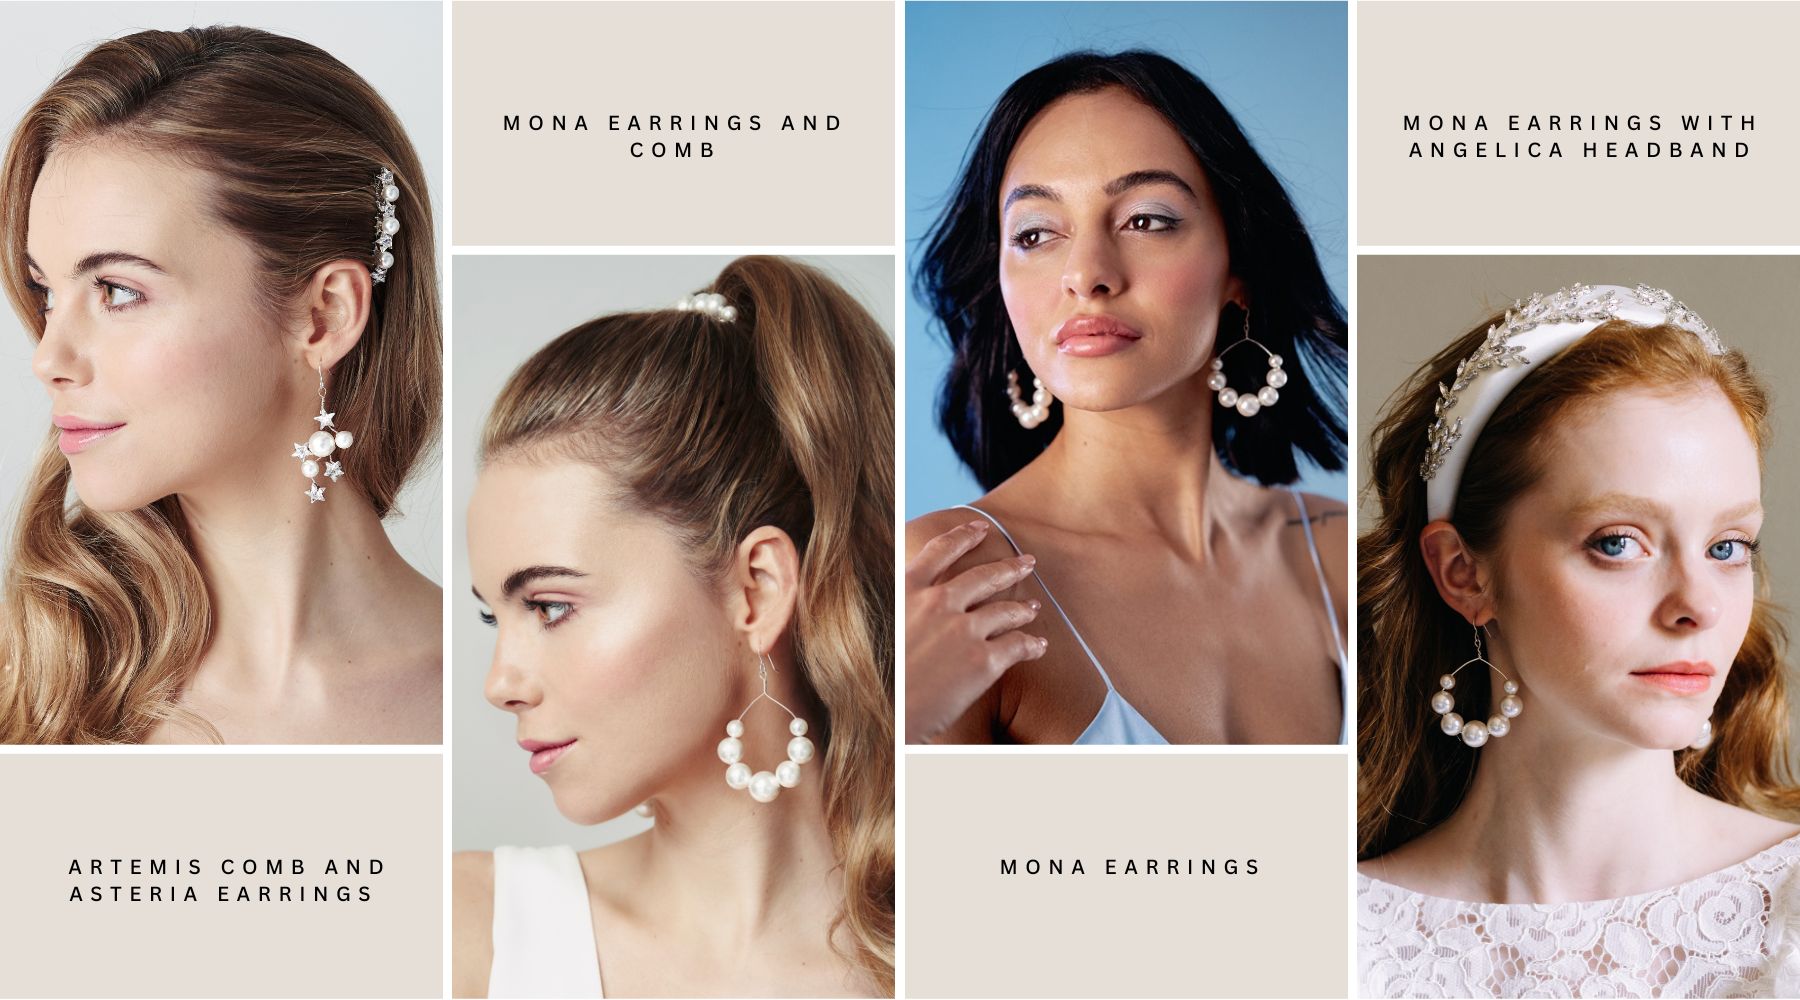 Models wear statement pearl earrings with and without wedding hair accessories